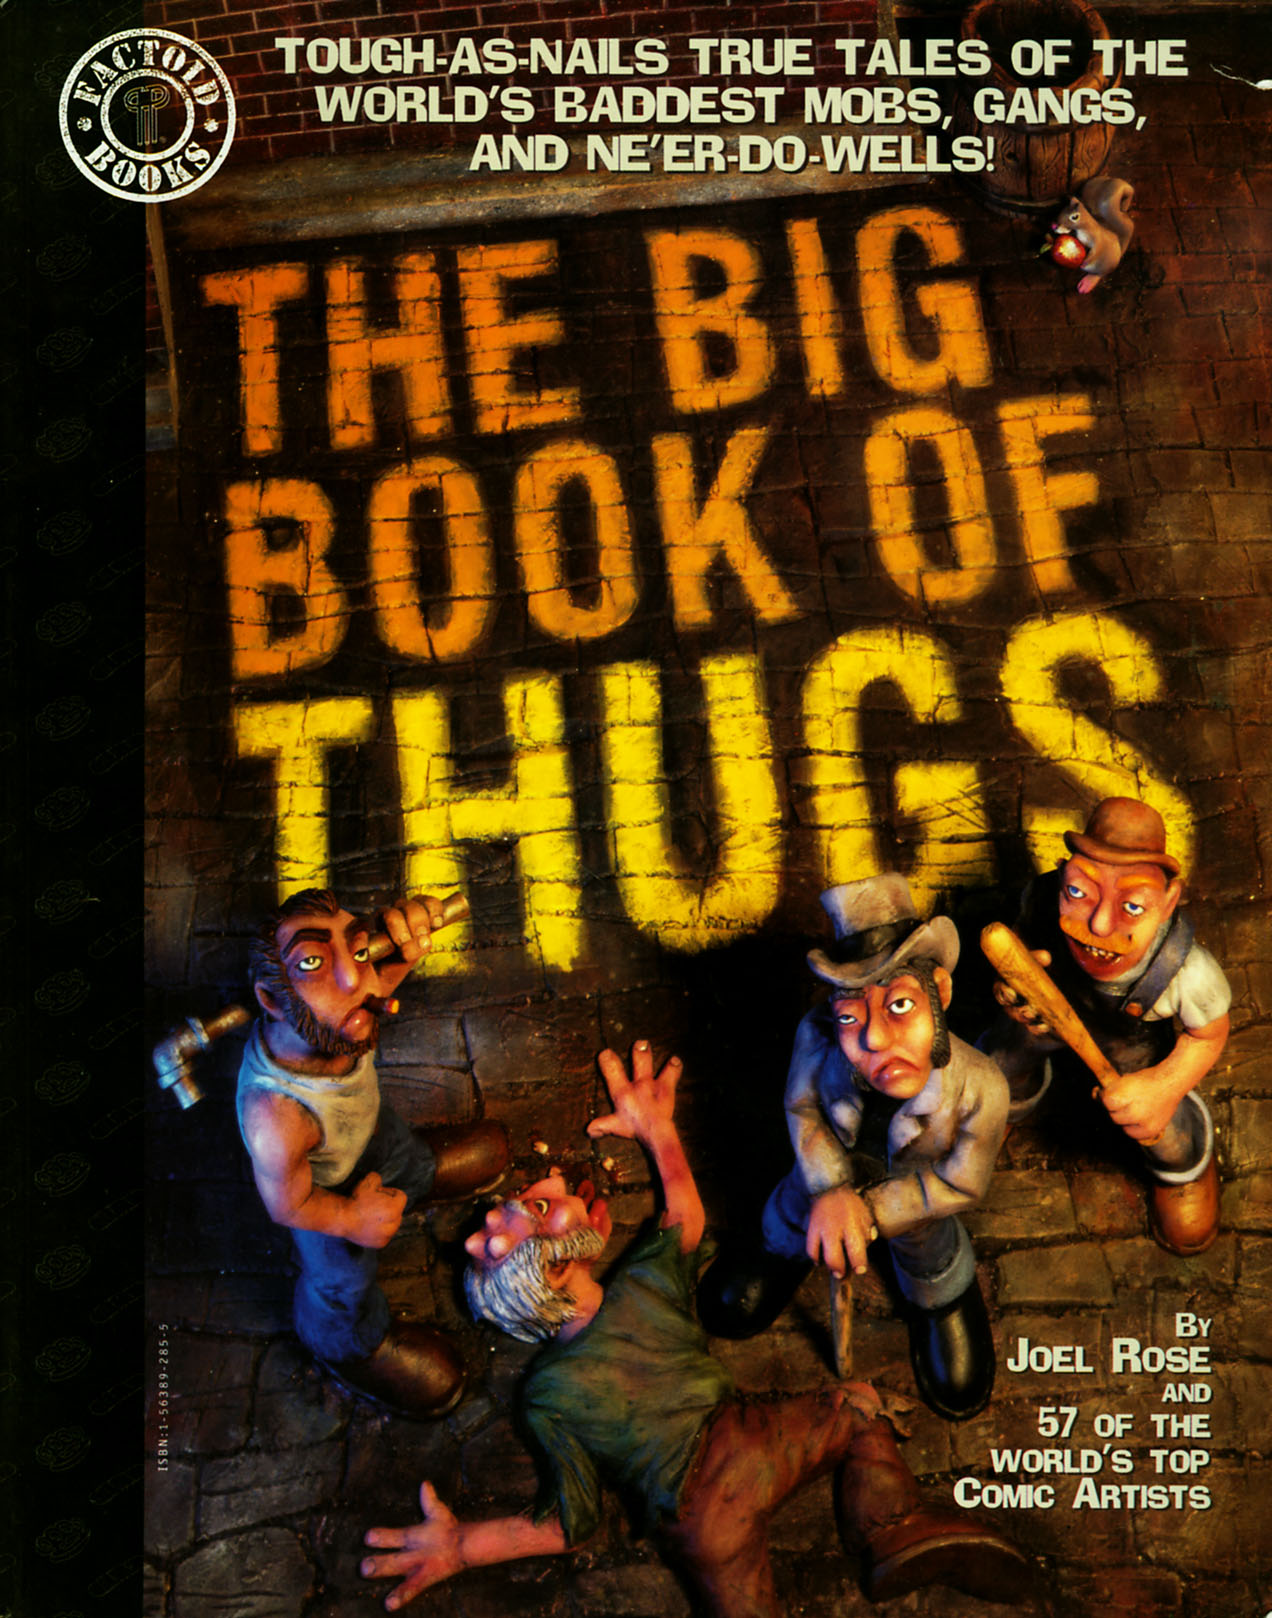 The Big Book of... TPB Thugs Page 1